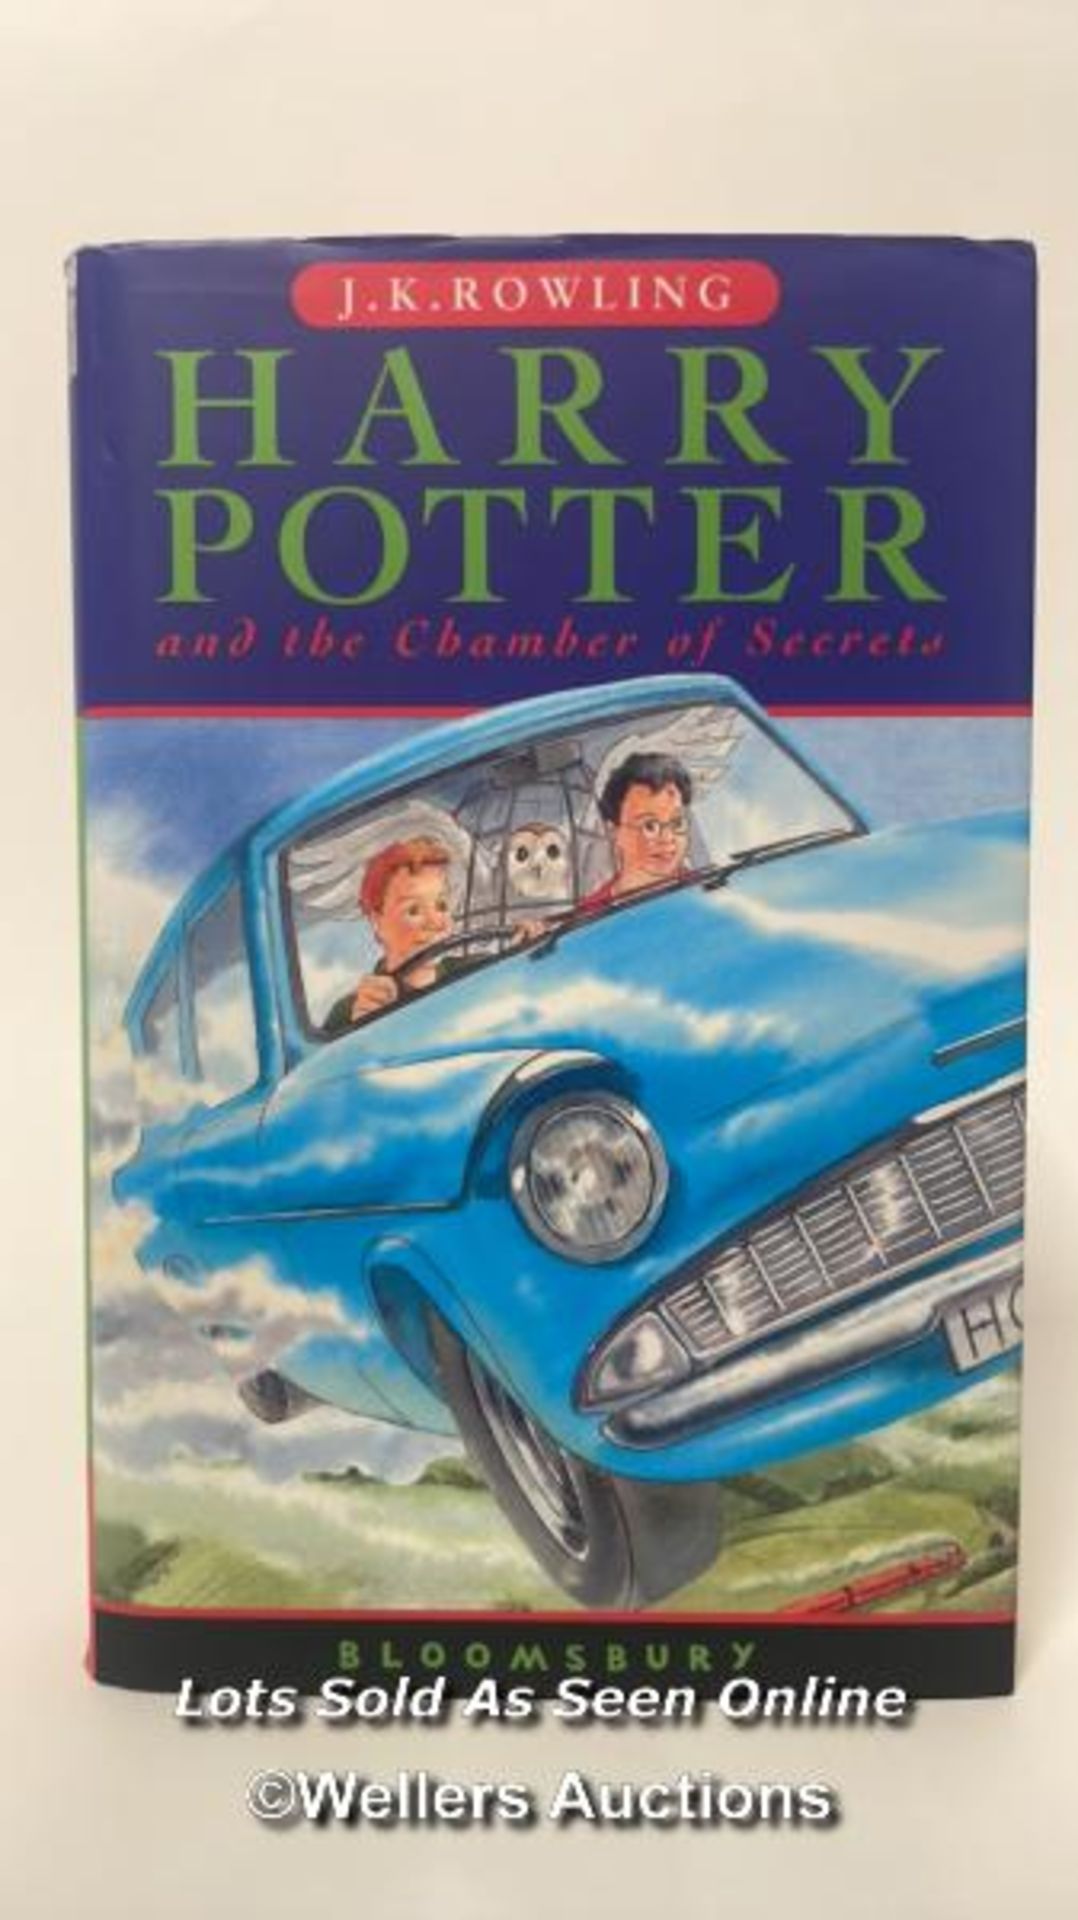 *Harry Potter - J.K. Rowling signed Harry Potter and the Chamber of Secrets, Bloomsbury 1998,